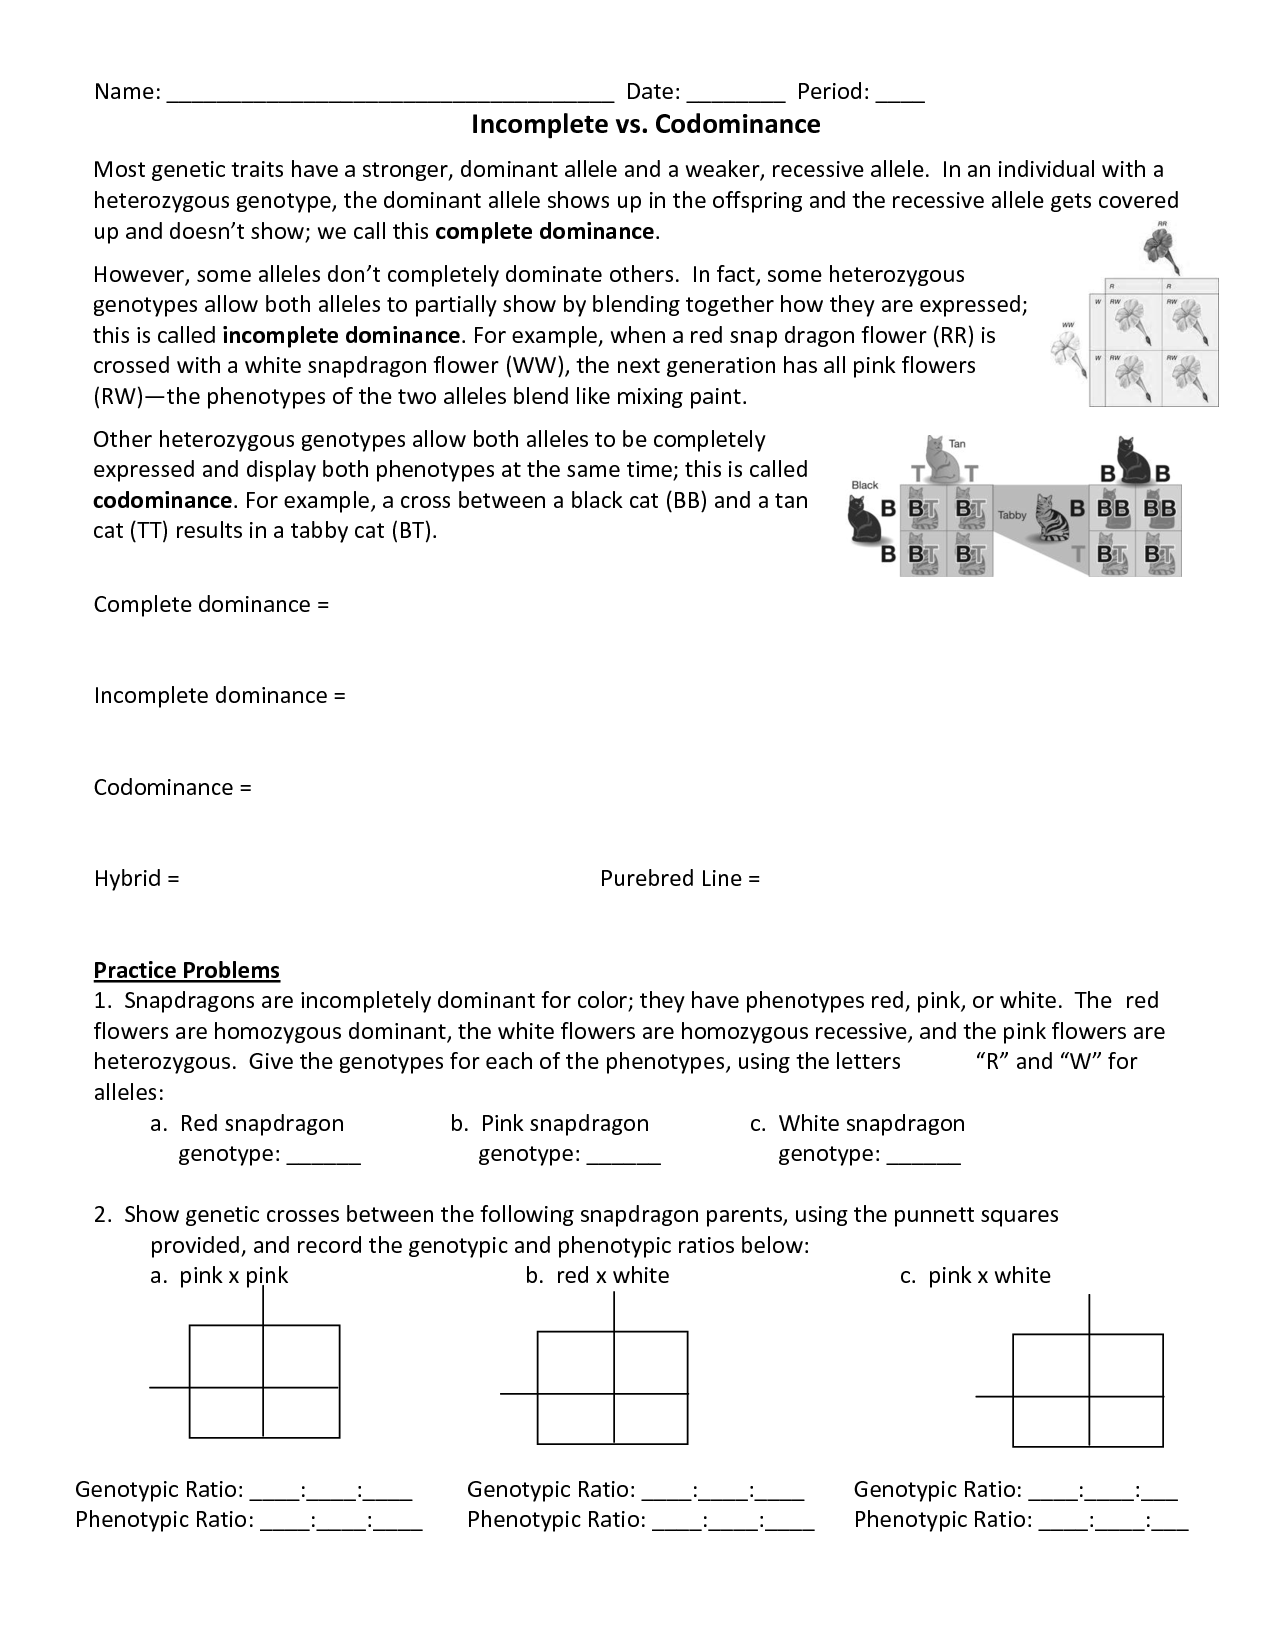 incomplete-dominance-worksheet-answers